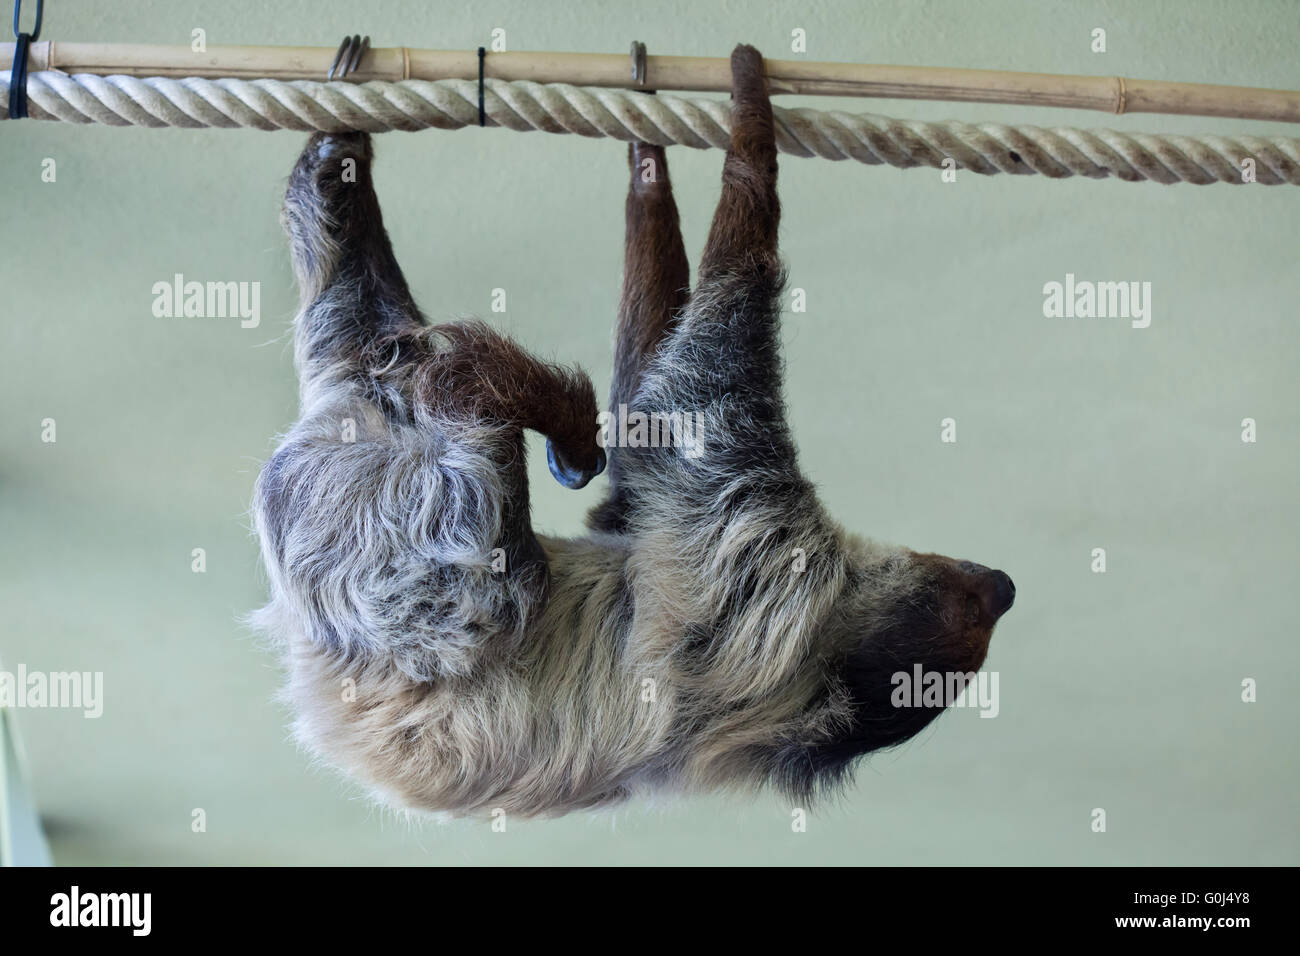 Linnaeus's two-toed sloth (Choloepus didactylus), also known as the southern two-toed sloth at Dresden Zoo, Saxony, Germany. Stock Photo